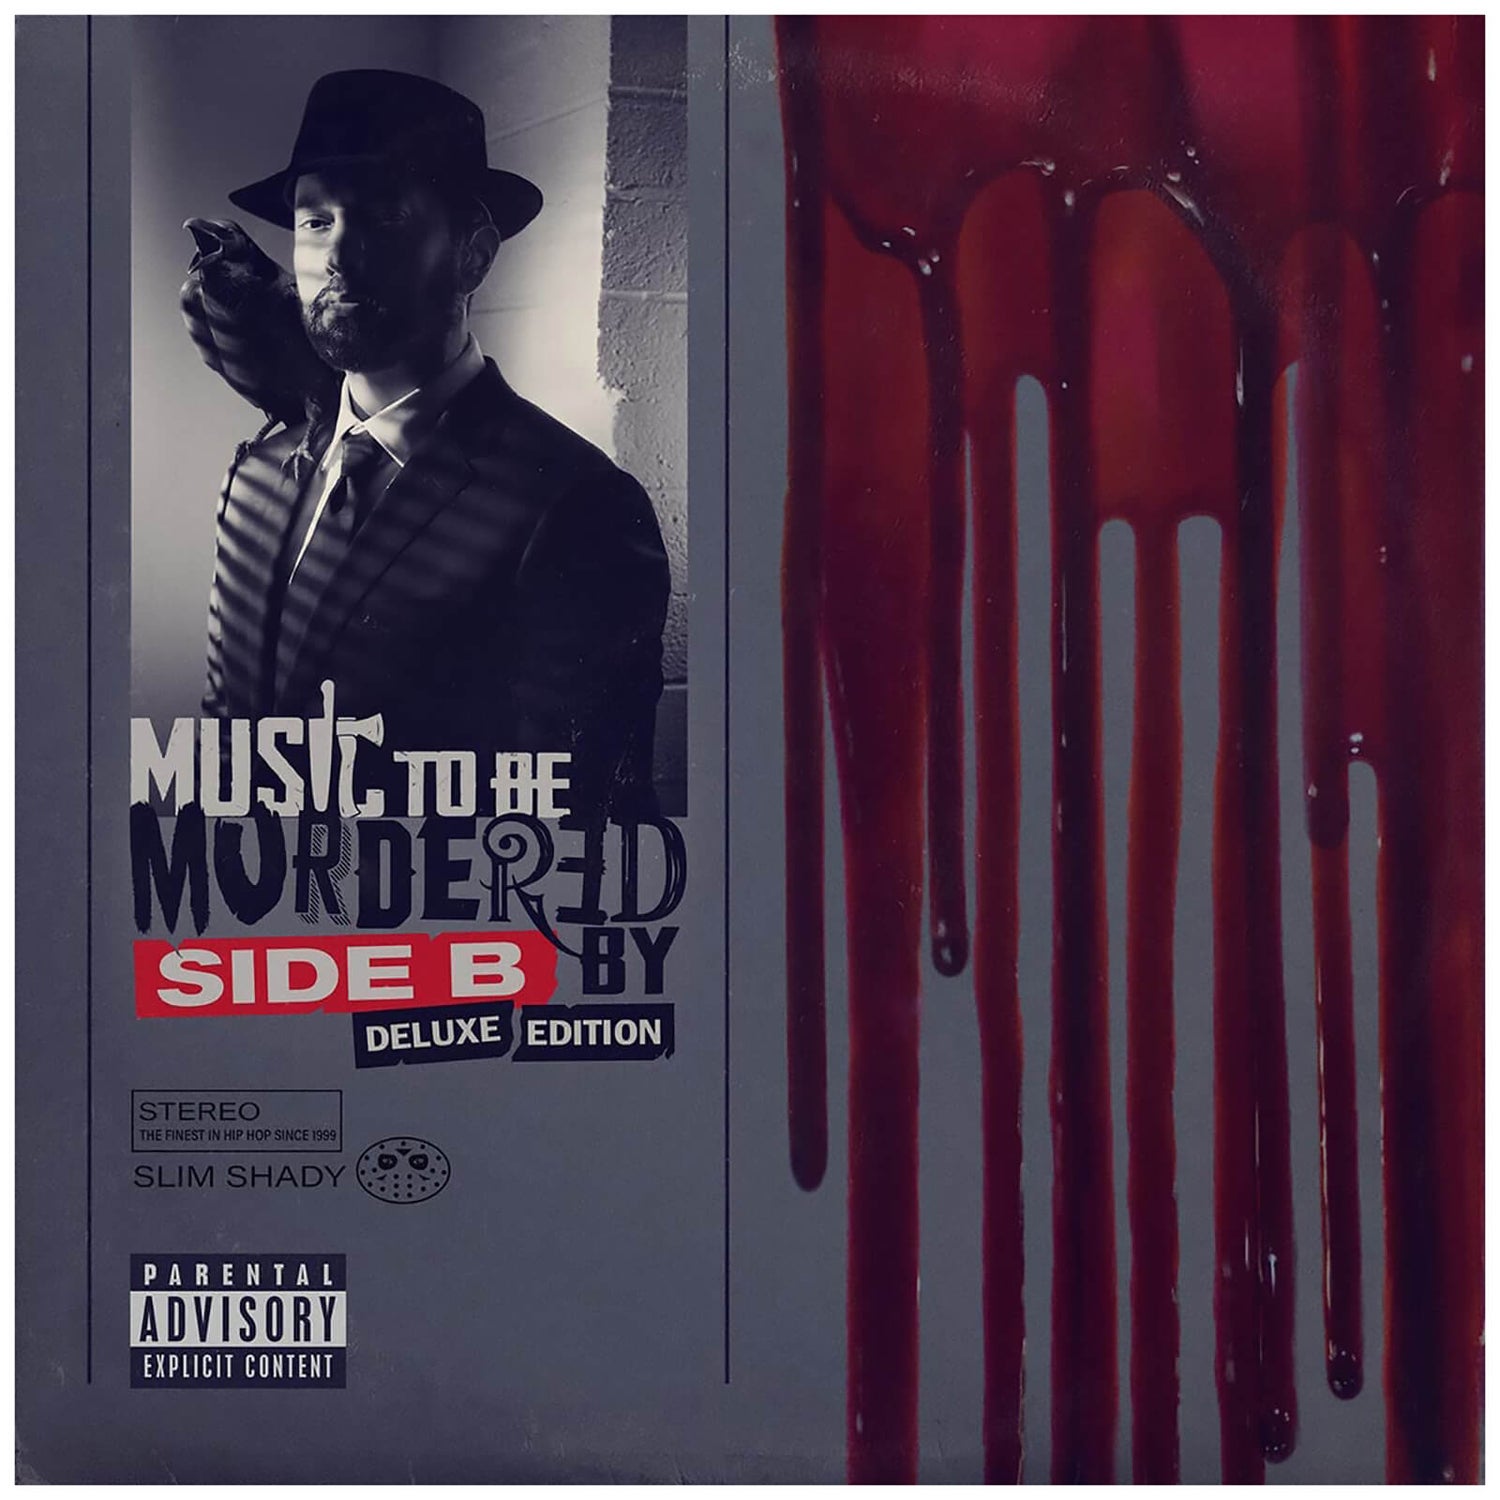 Eminem - Music To Be Murdered By - Side B Deluxe Vinyl Set